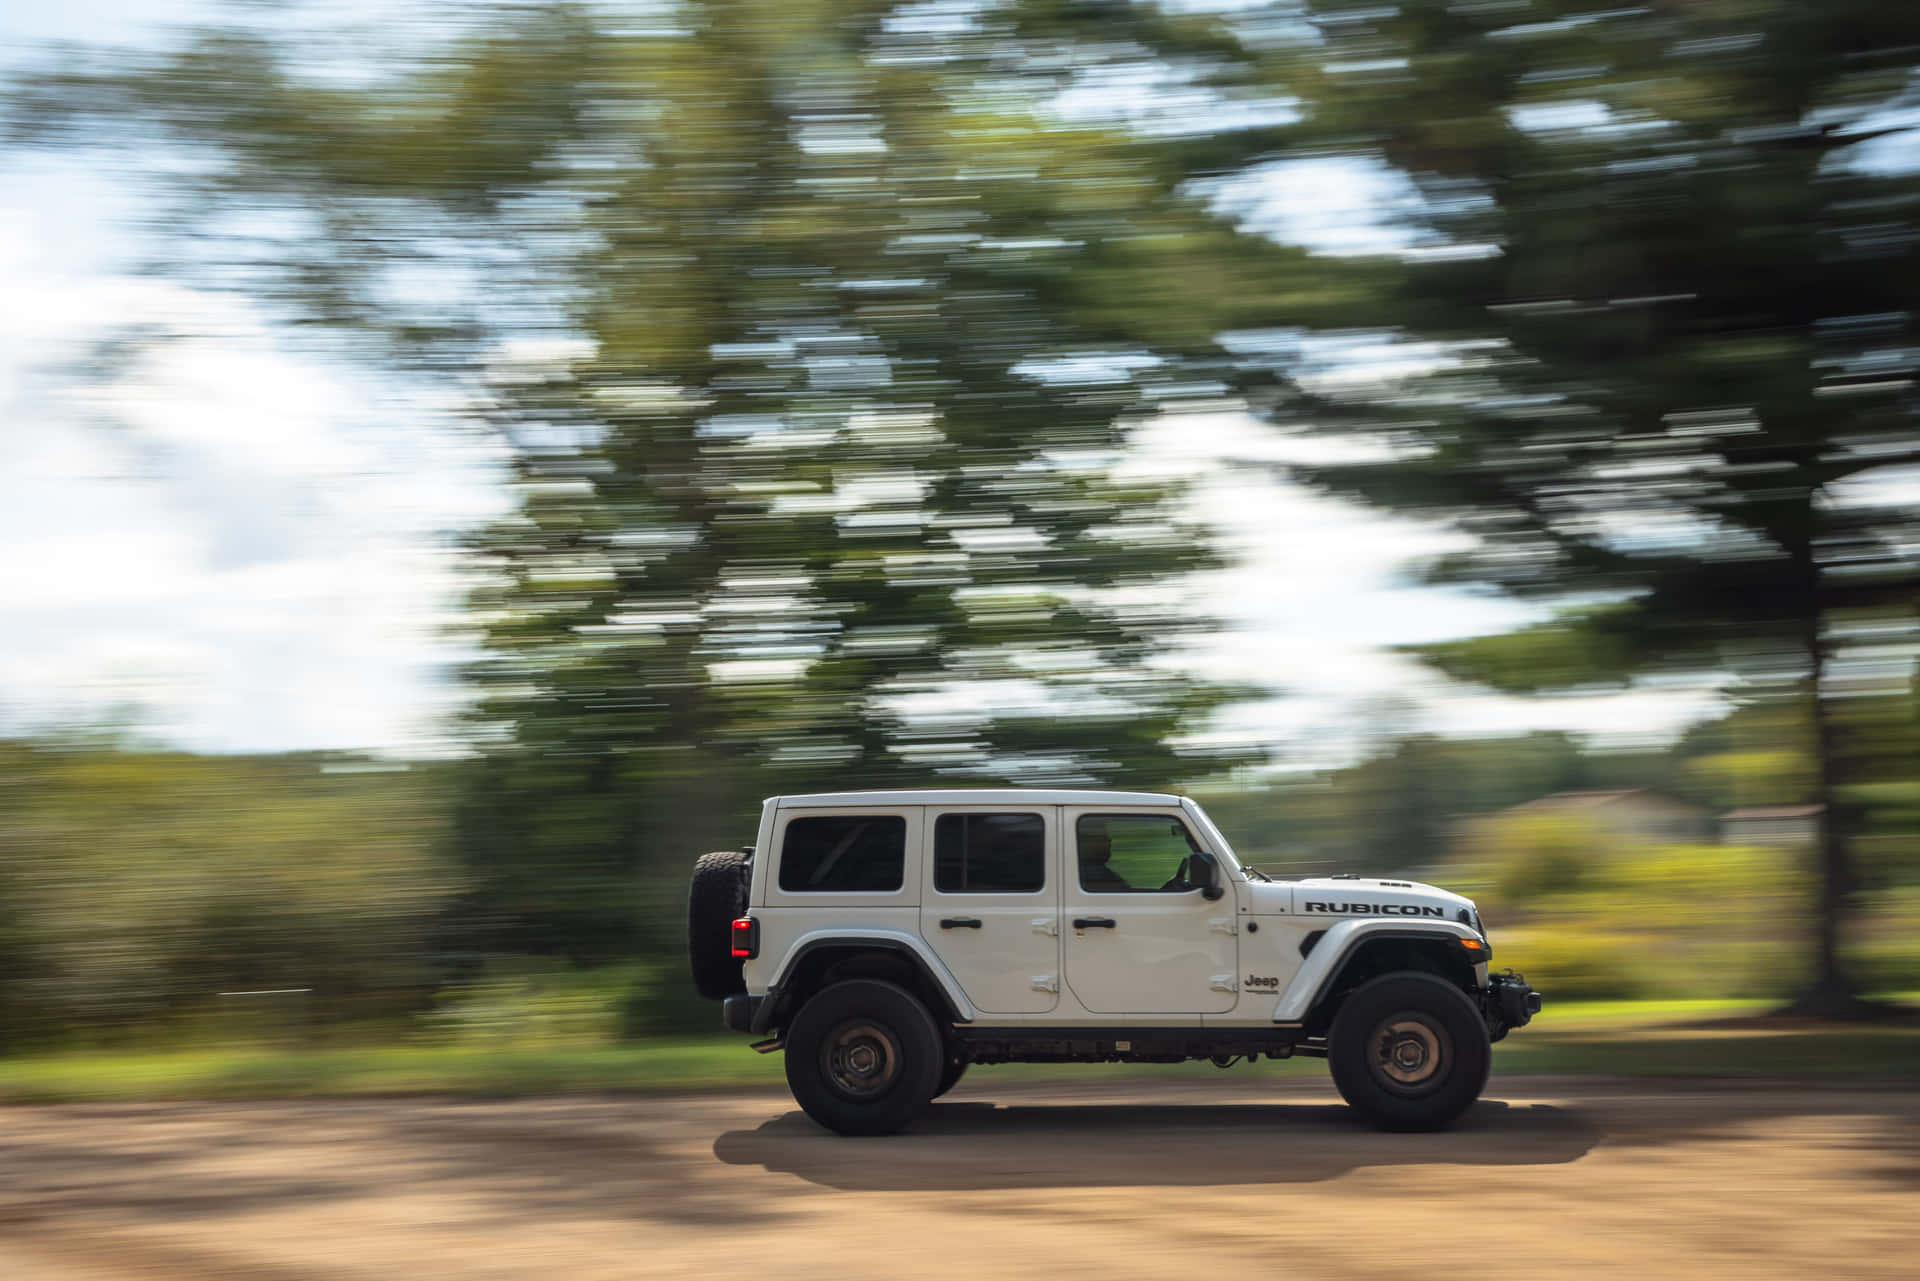 Conquer the trails with this iconic Jeep model